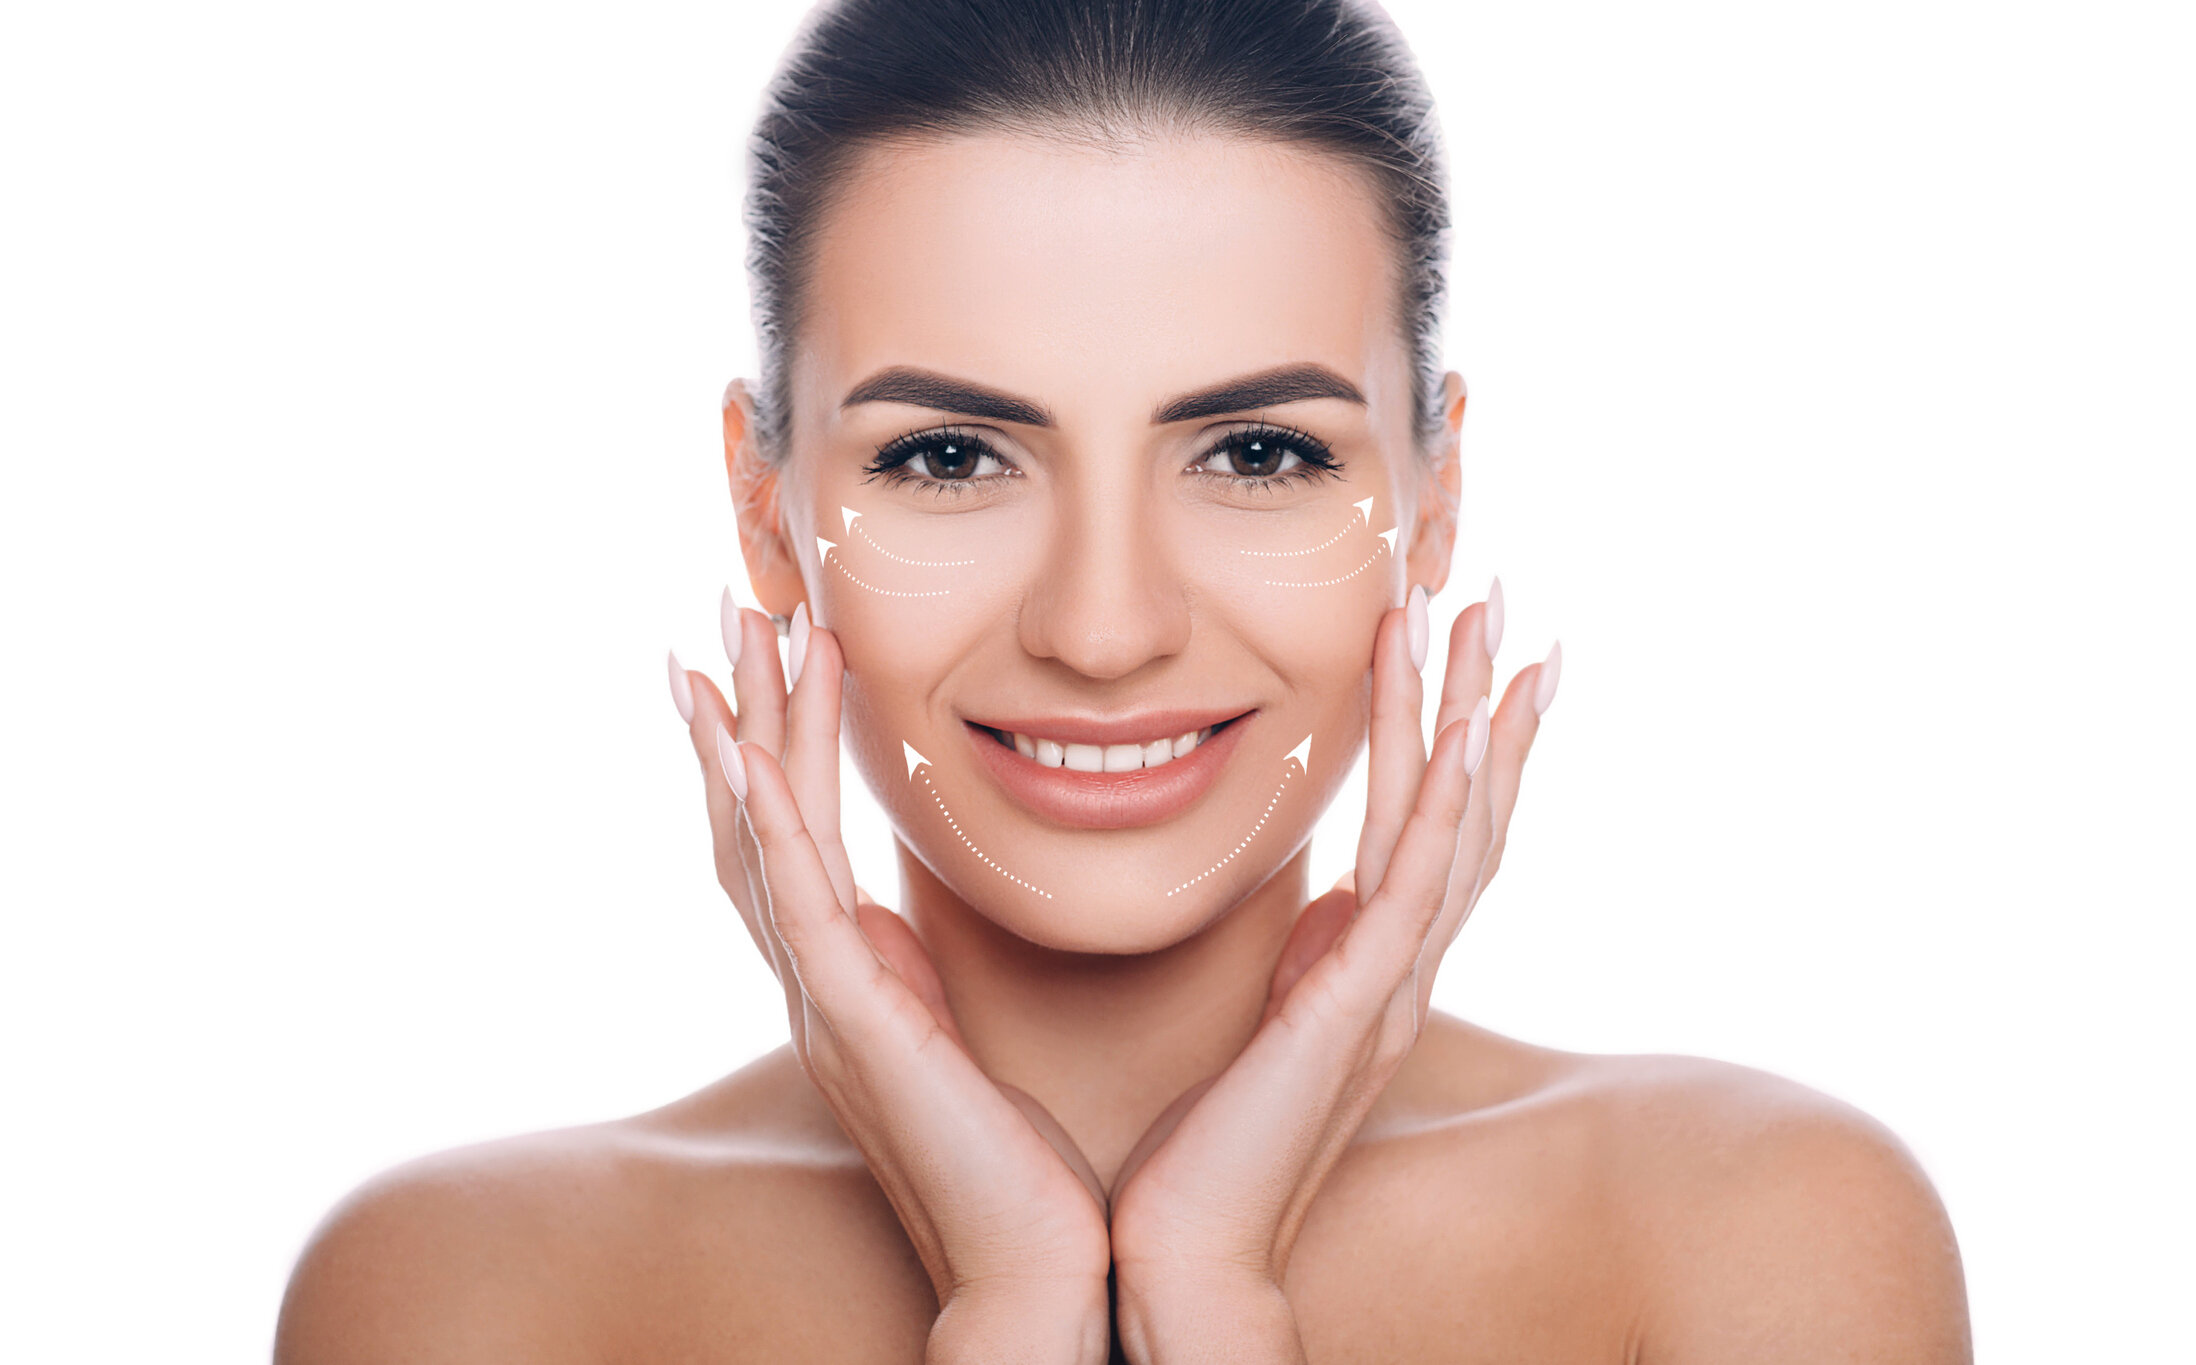 Micro Lifting Treatments Slow Down Aging - Improves Skin  Home Kit  Available 25% OFF Free Delivery — Kapyderm USA